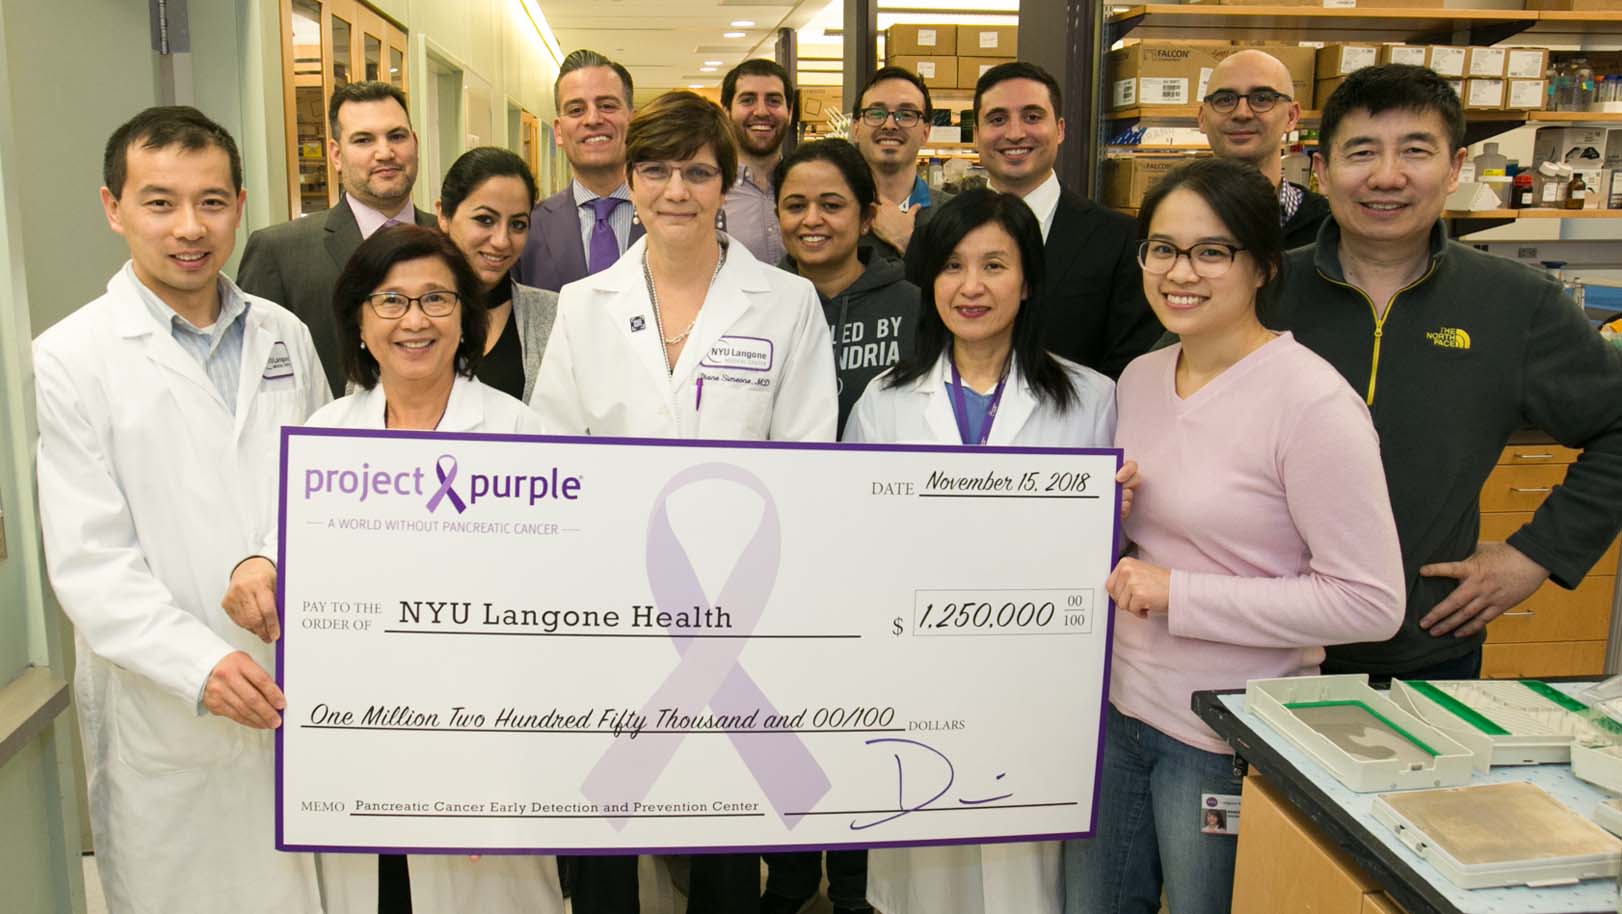 PCC’s Pancreatic Cancer Center team and Project Purple celebrate their new partnership to combat pancreatic cancer